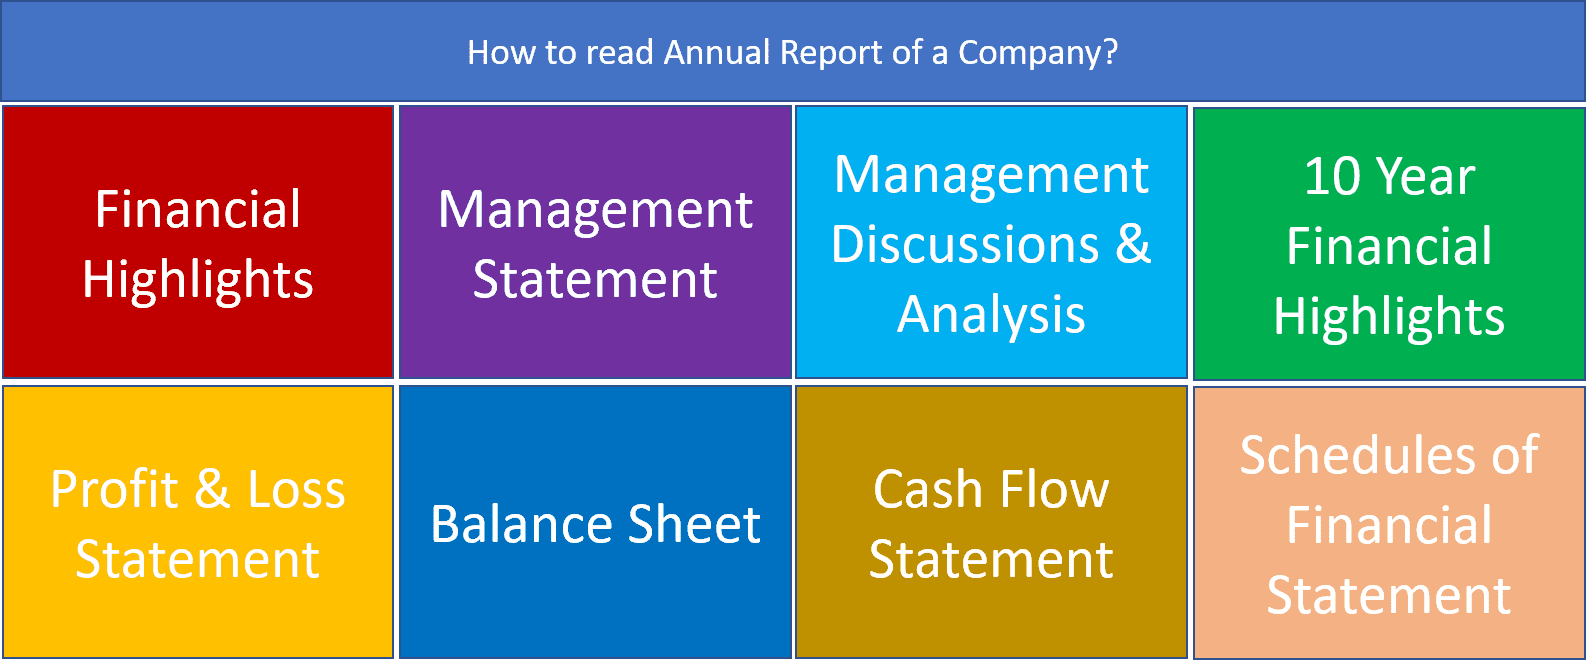 How to read an Annual Report of a Company